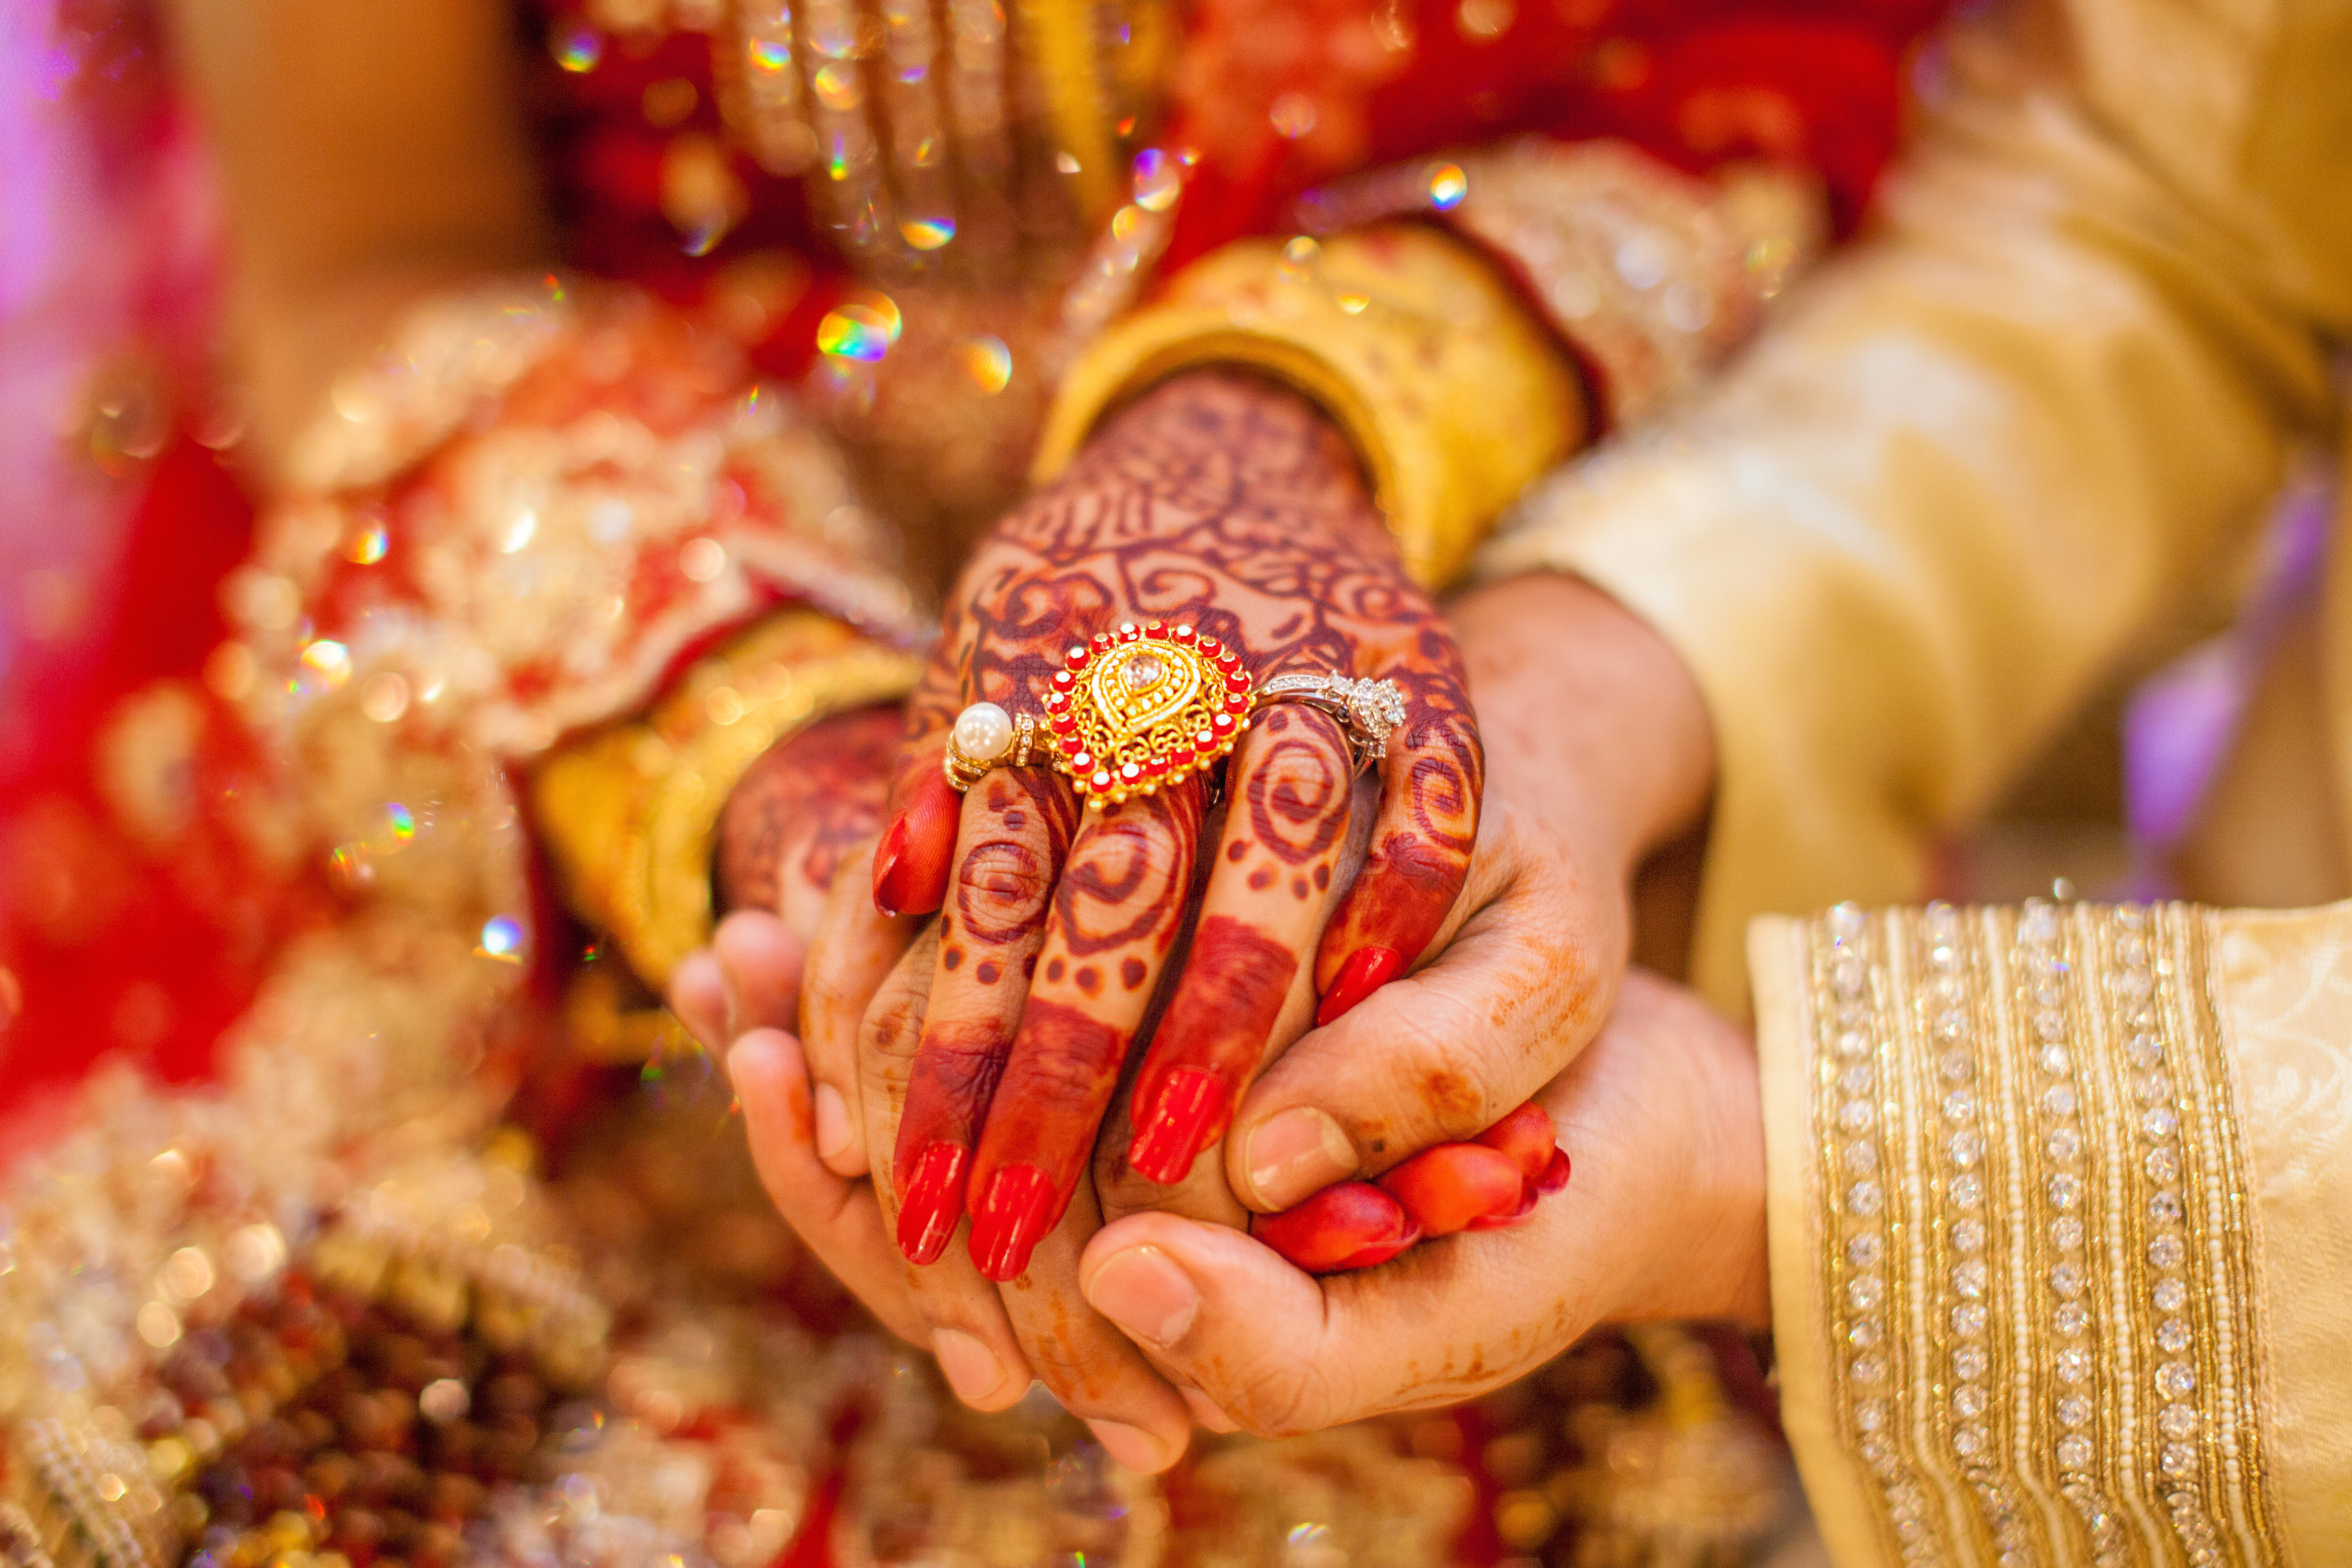 A woman hands with gold rings and henna | Source: Shutterstock